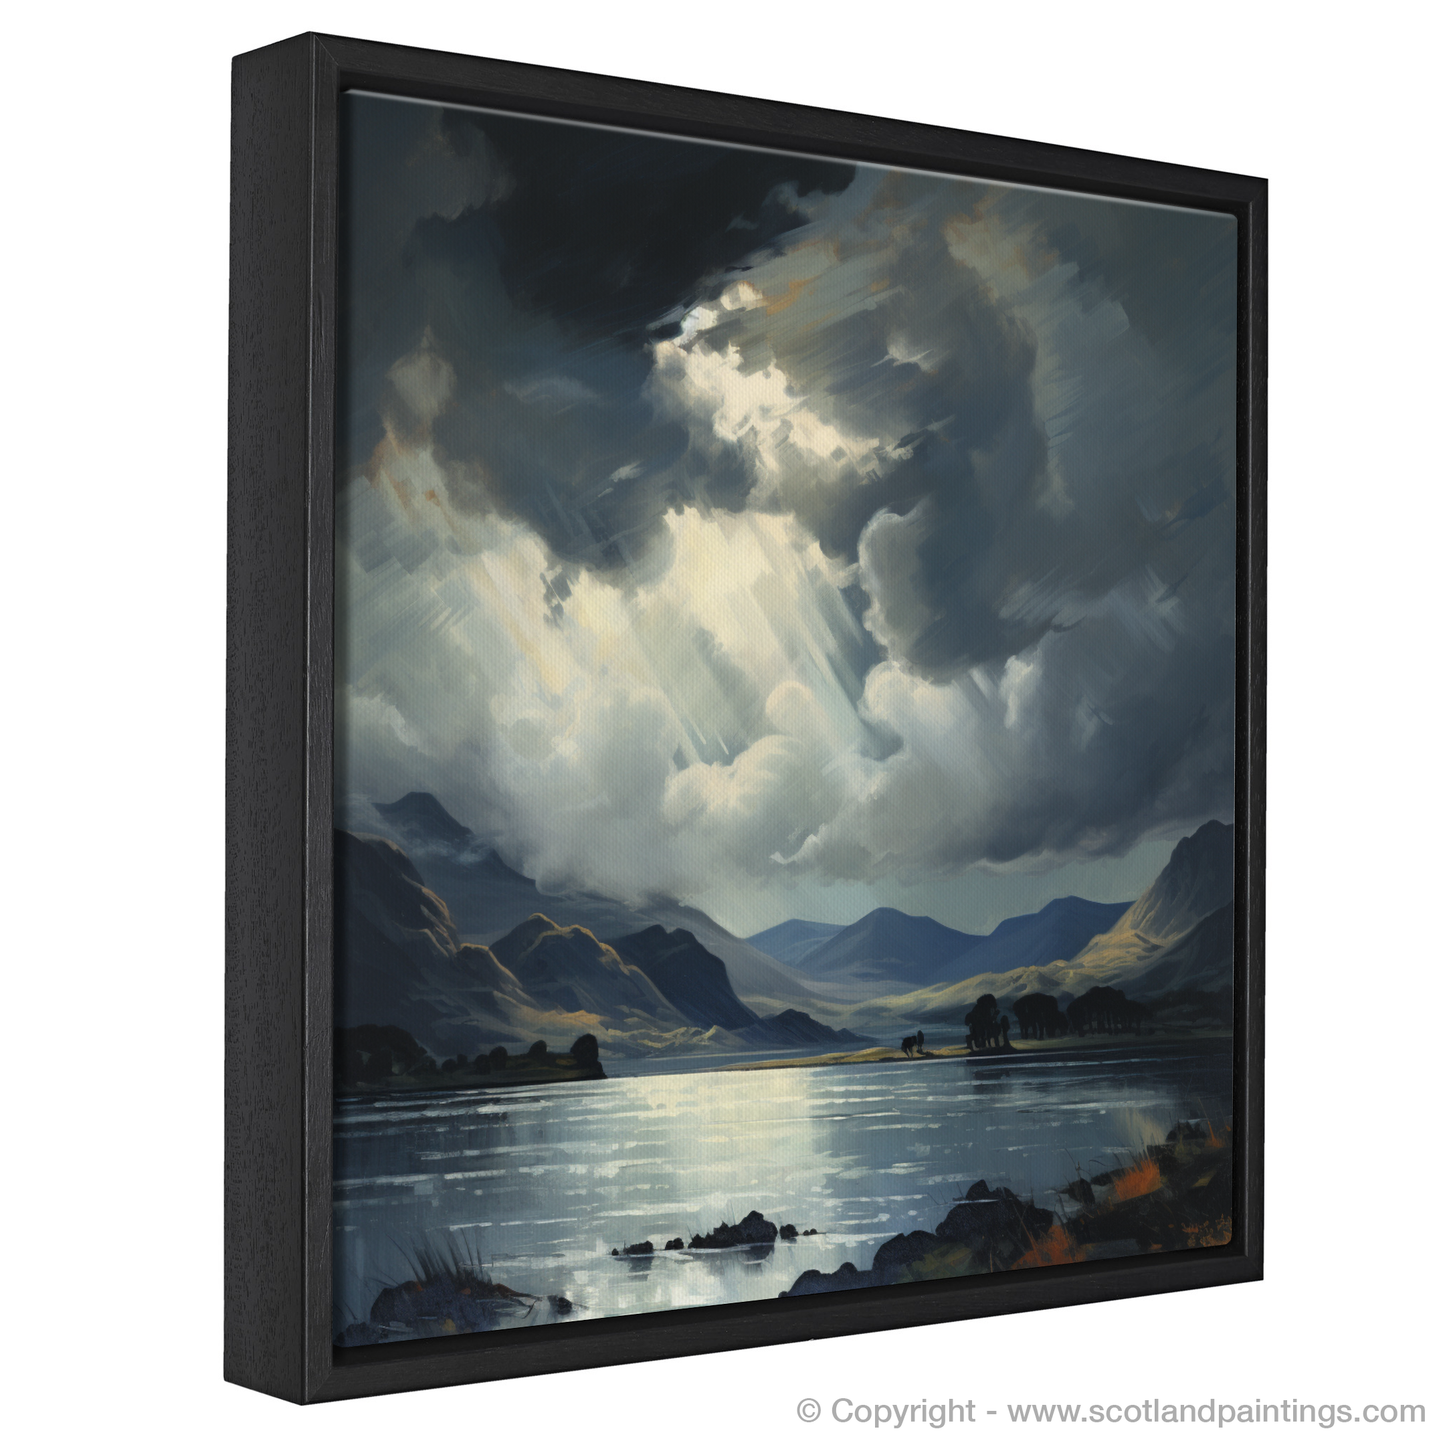 Painting and Art Print of Storm clouds above Loch Lomond entitled "Storm Clouds Enchantment over Loch Lomond".